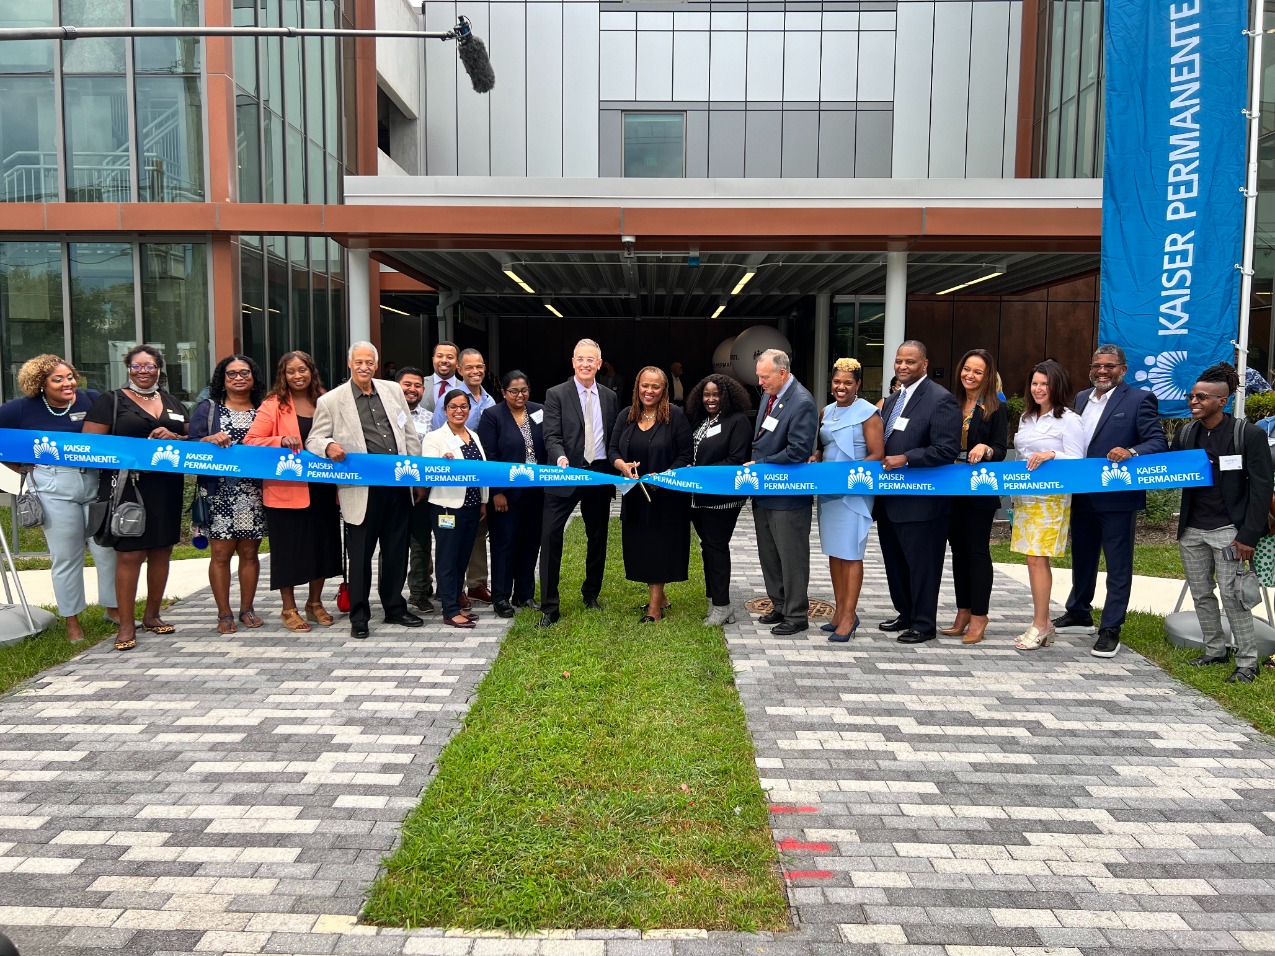 Kaiser Permanente opened its 48,000-square-foot West Hyattsville Medical Center in Prince George’s County this past August.